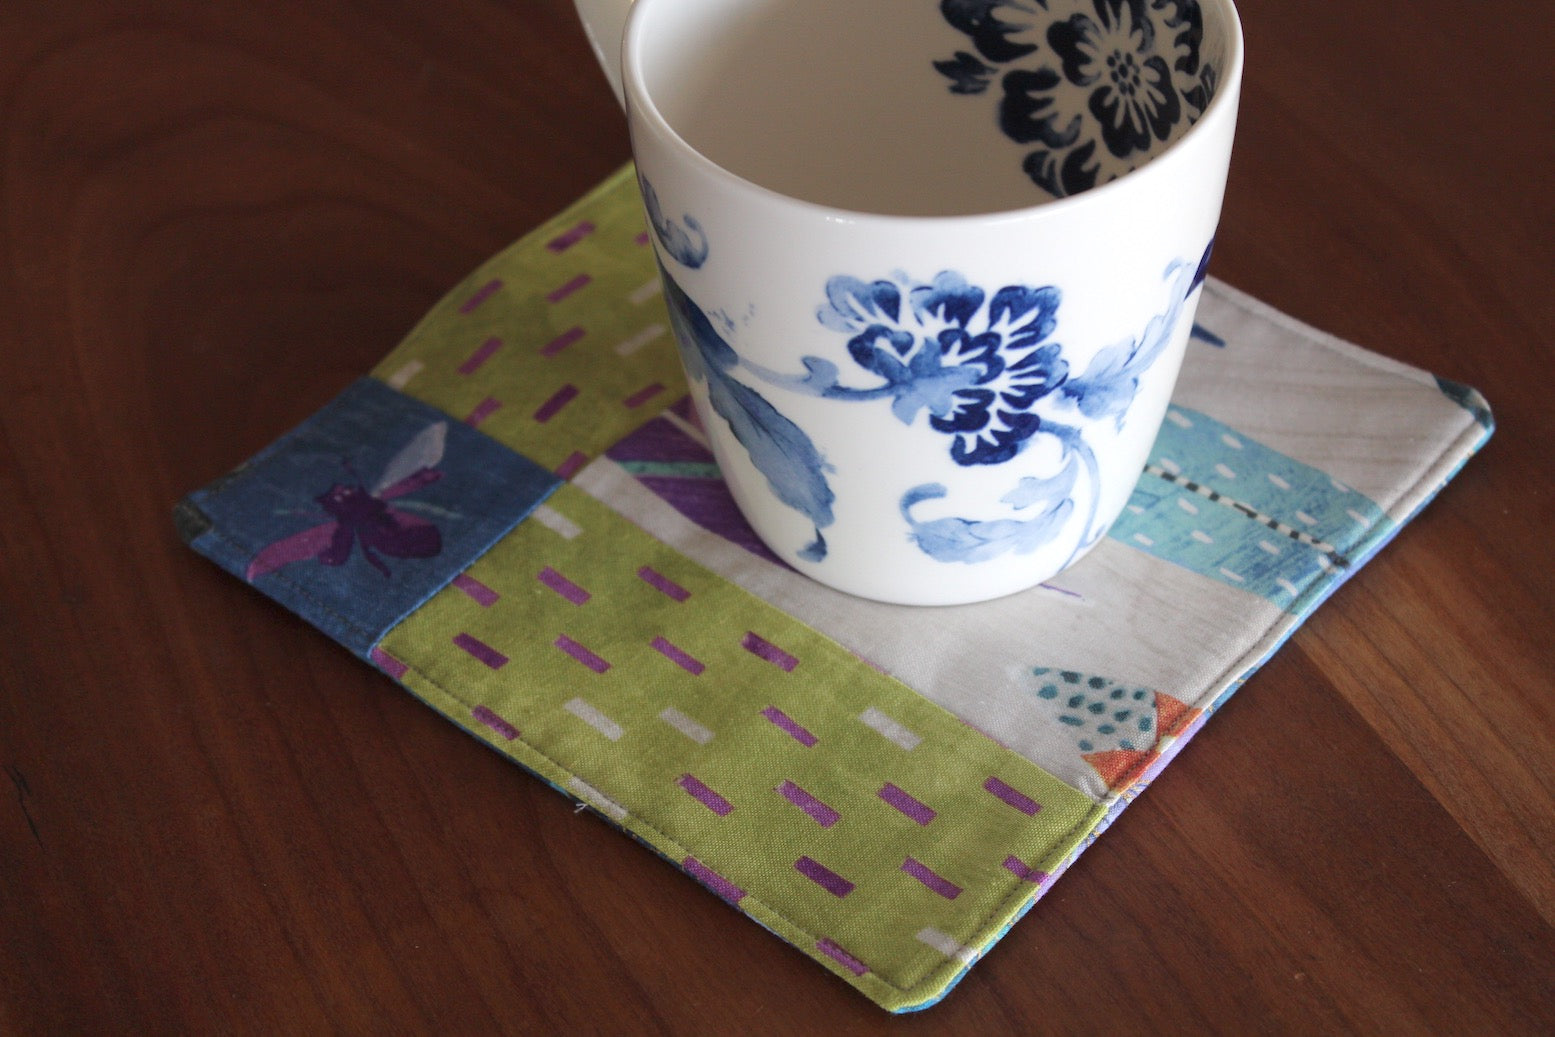 Mother Earth Mug Rug - Meadow-The Blue Peony-Category_Coaster,Color_Cream,Color_Lime Green,Color_Purple,Department_Kitchen,Theme_Art,Theme_Woodland